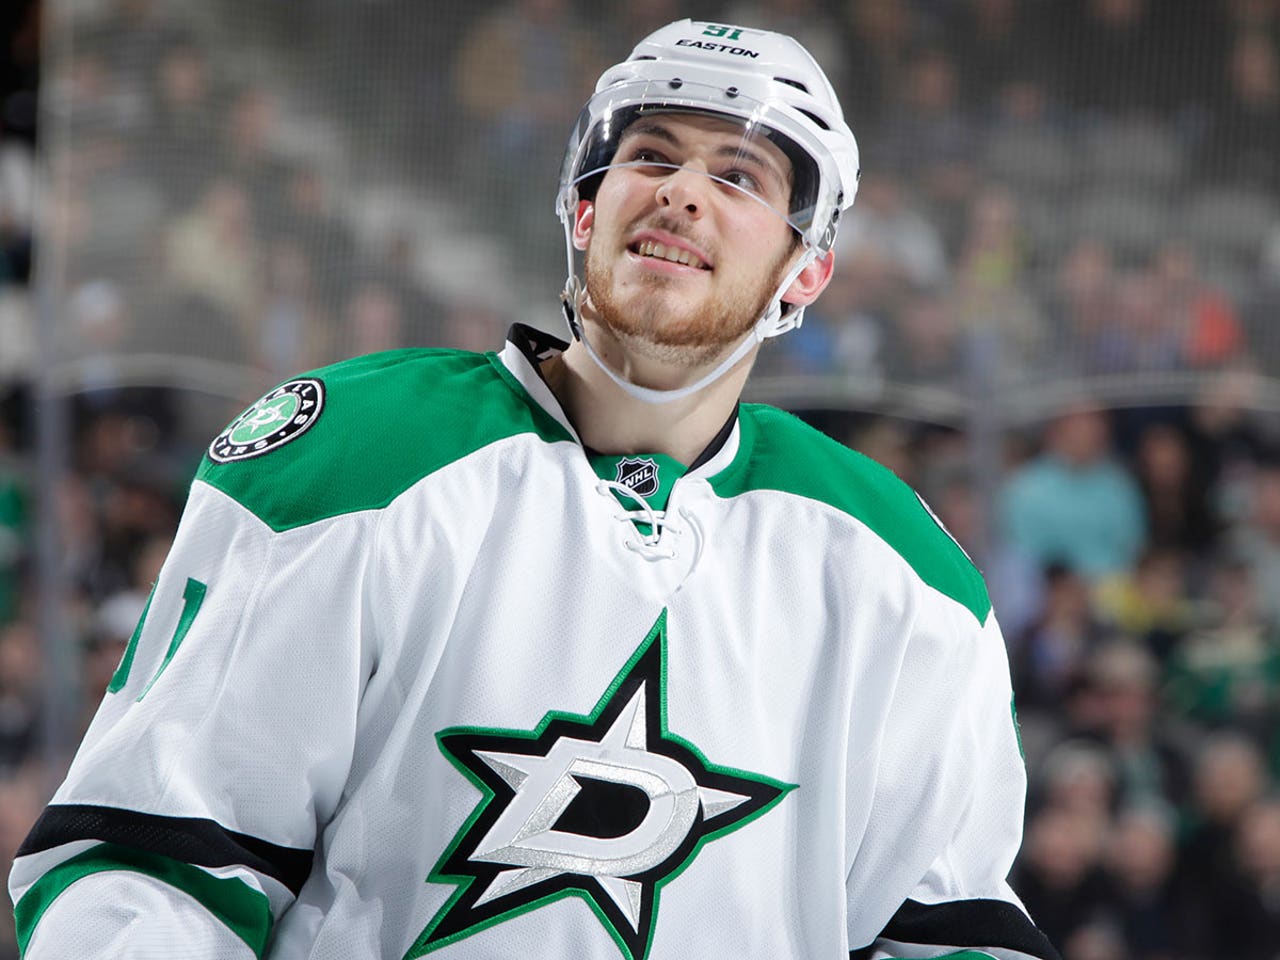 After one-sided Bruins trade, it's a breakaway for Tyler Seguin